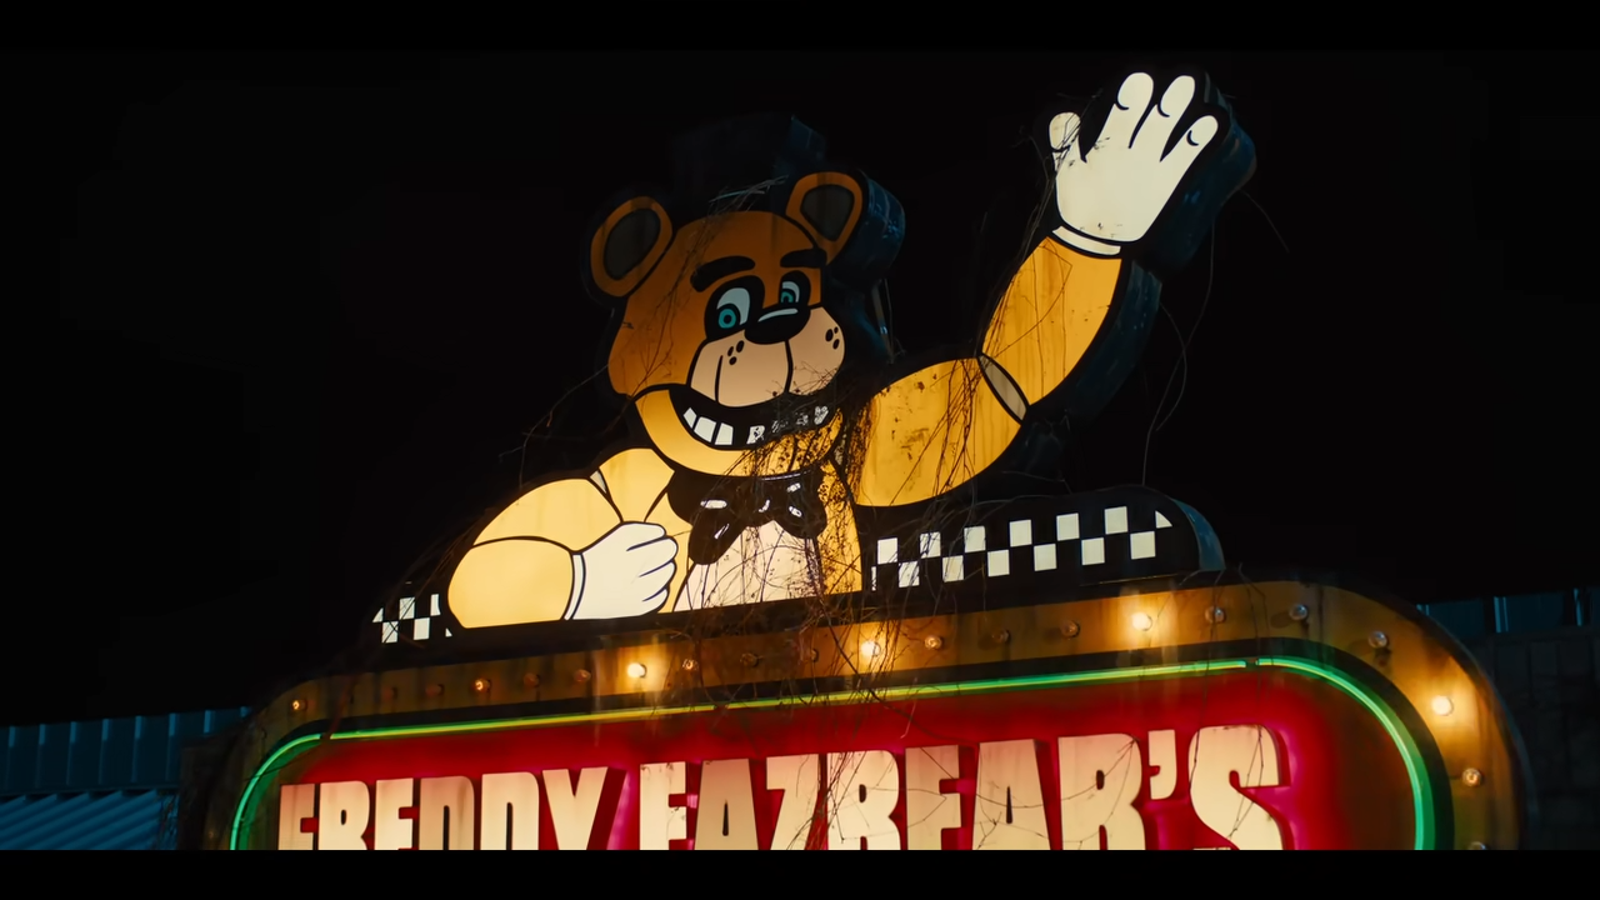 Five Nights At Freddy s Here's your first look at the Five Nights at Freddy's movie | Eurogamer.net